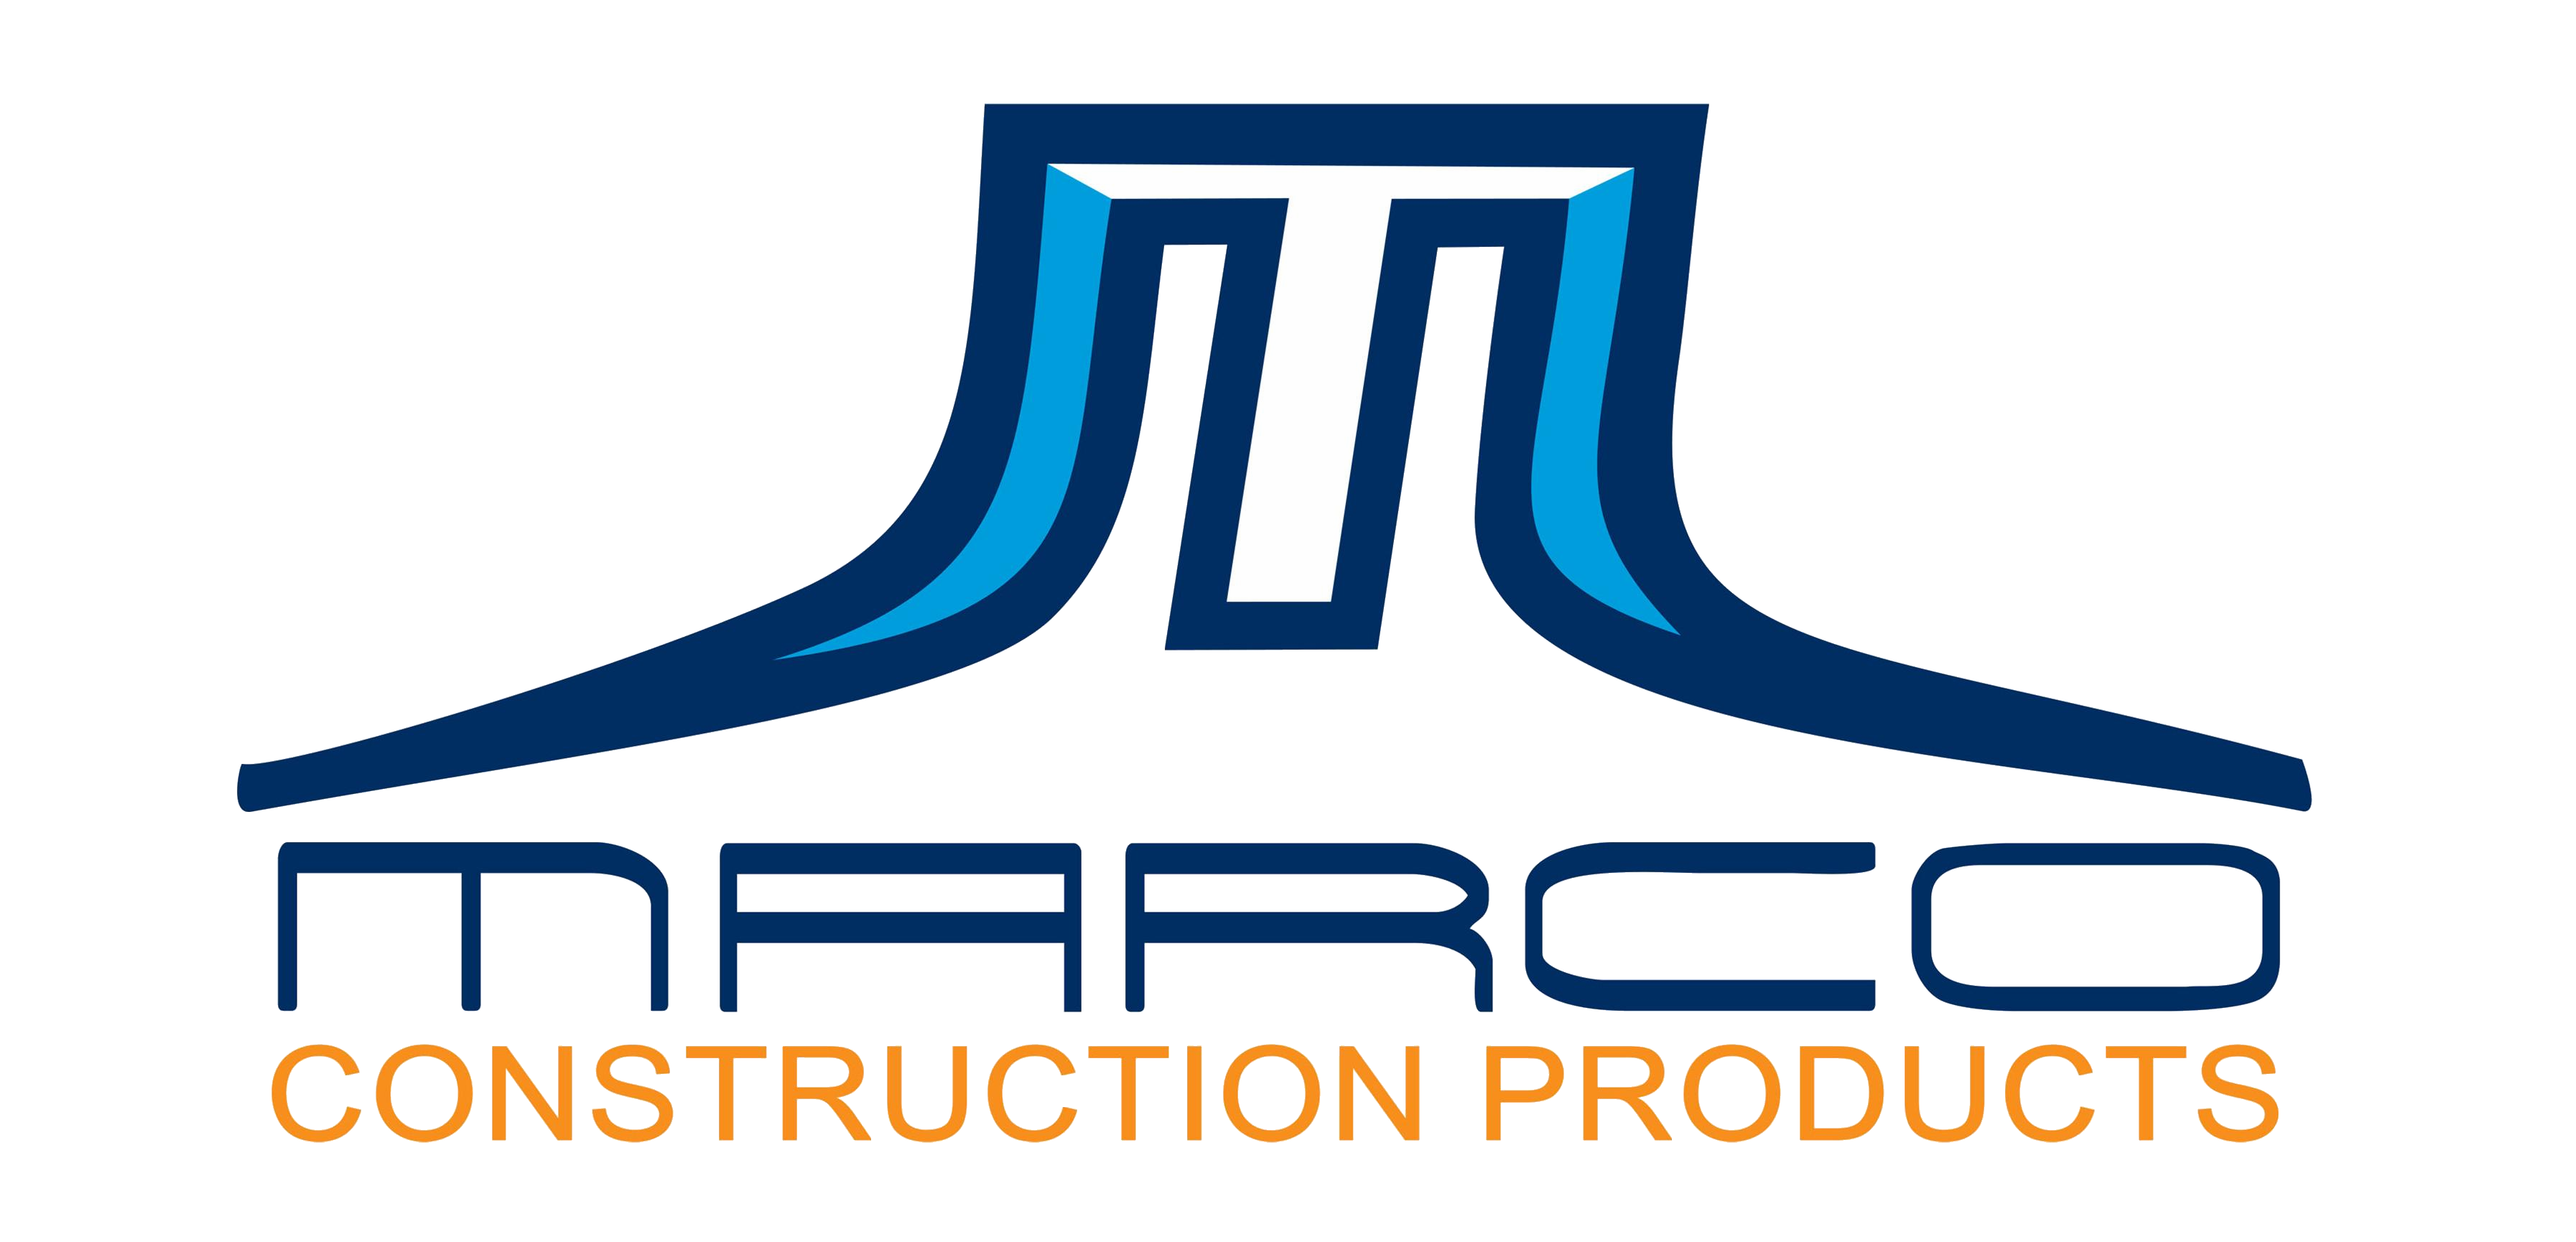 Marco Construction Products